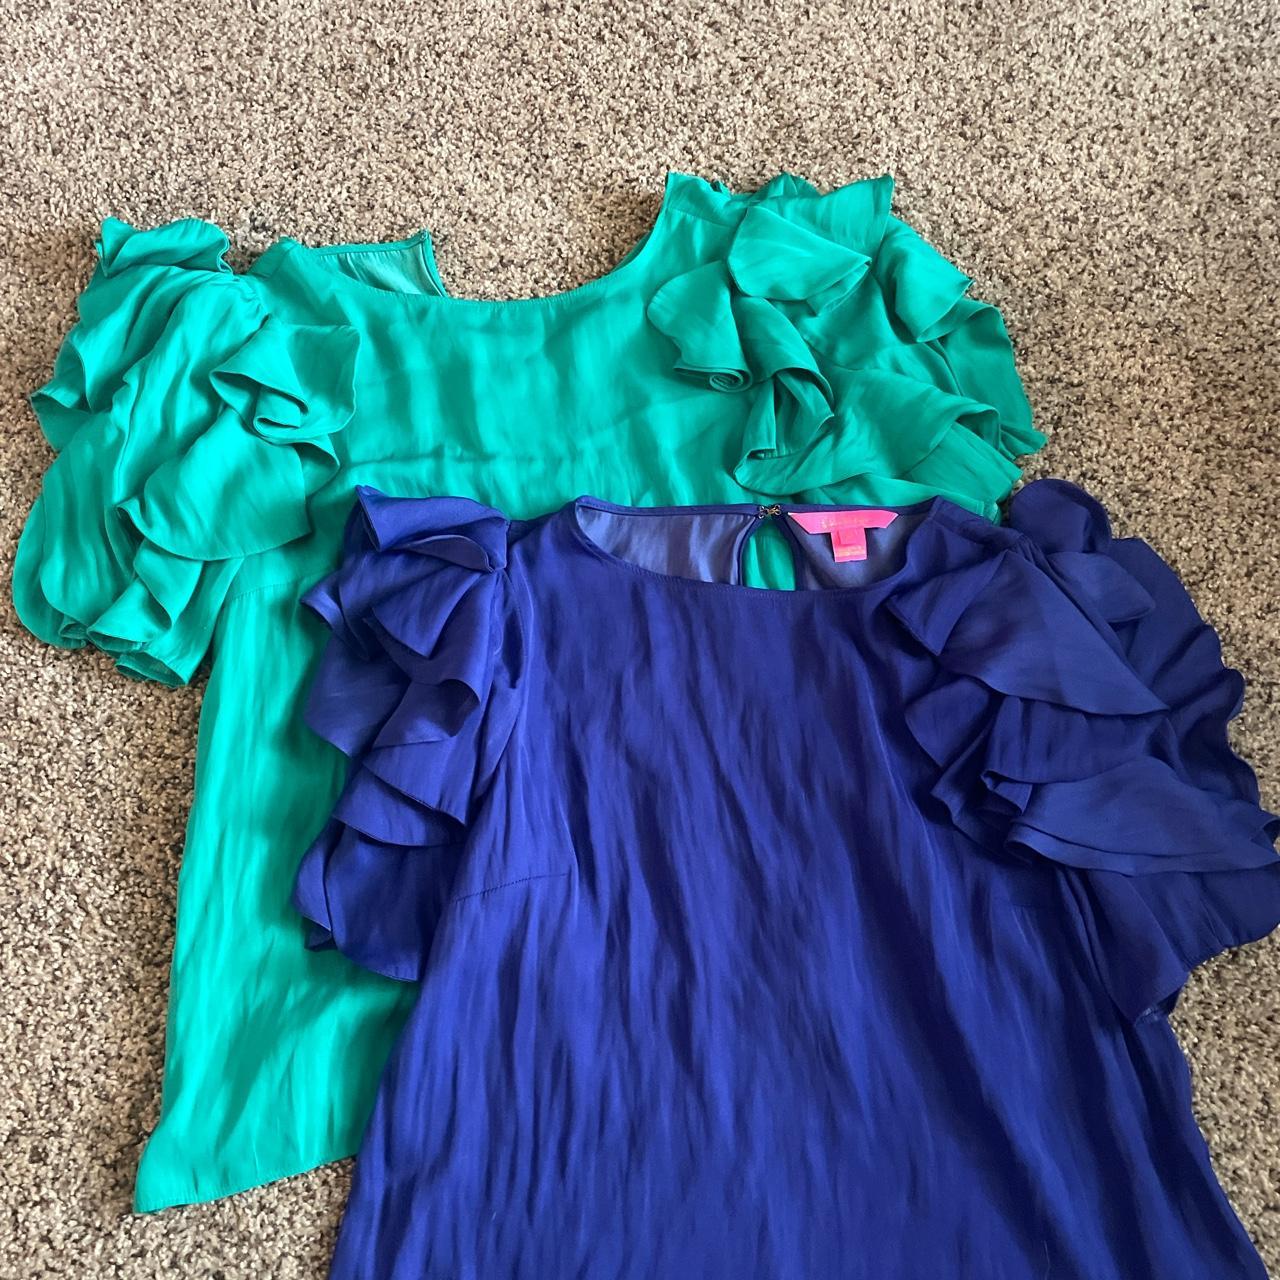 Lilly Pulitzer Women's Navy and Green Shirt | Depop